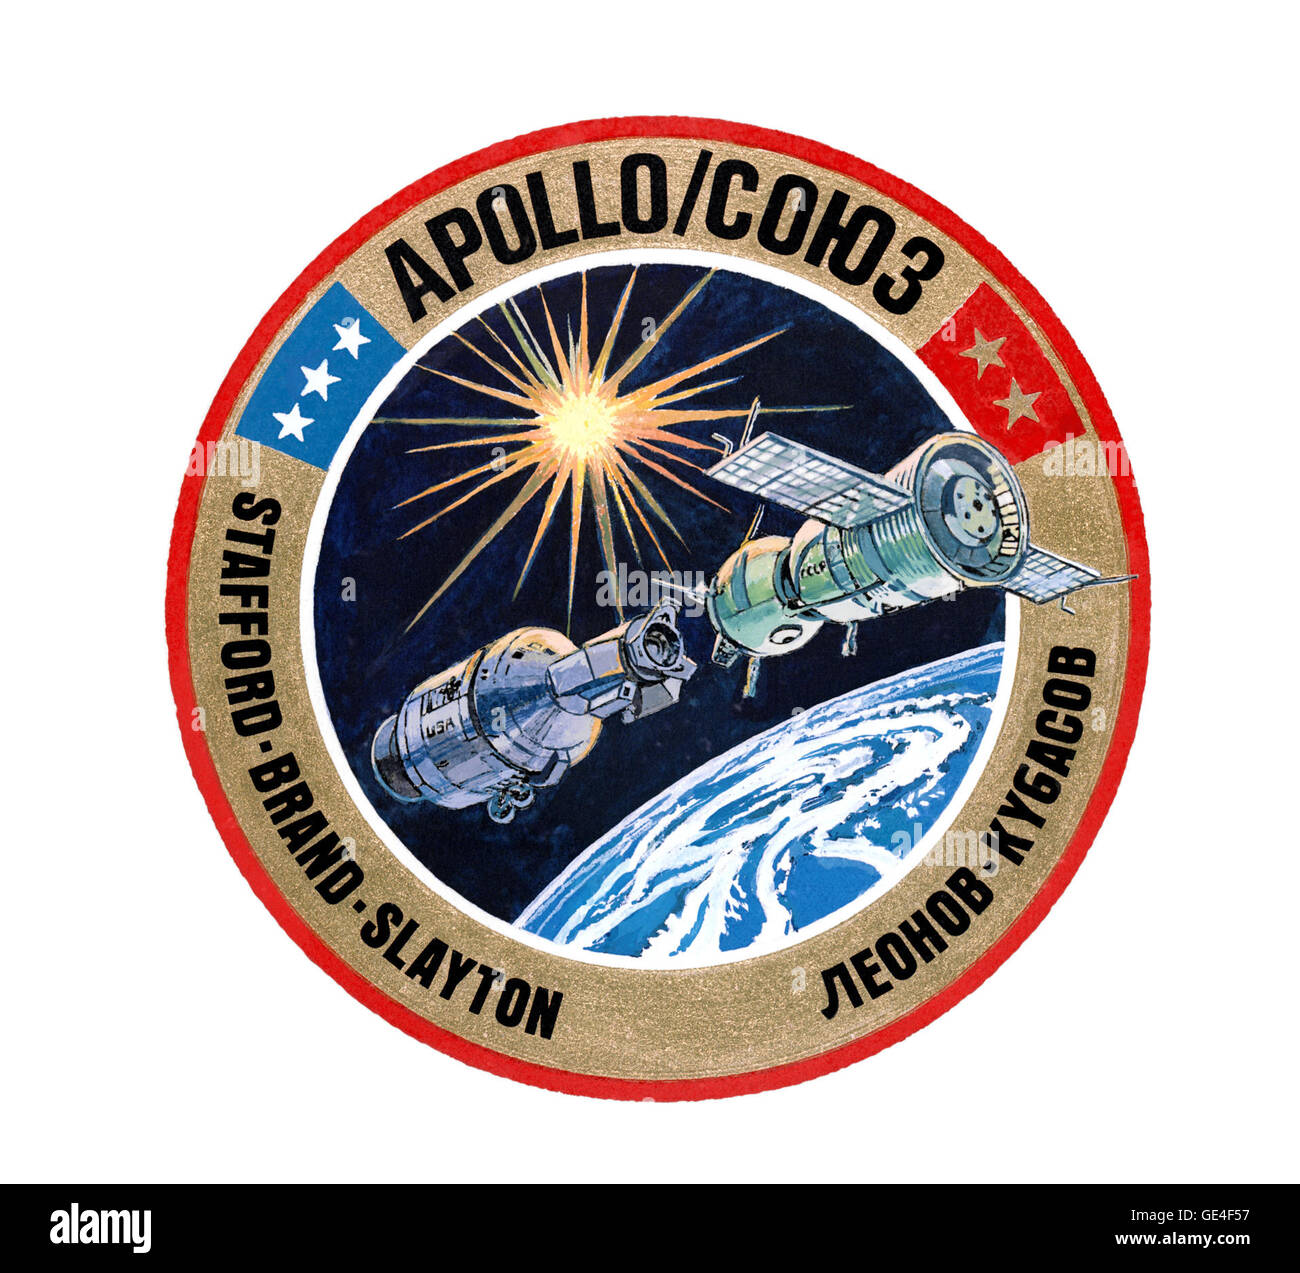 This is the American crew insignia of the joint United States-USSR Apollo-Soyuz Test Project (ASTP). The white stars on the blue background represent American astronauts Thomas P. Stafford, commander; Vance D. Brand, command module pilot; and Donald (Deke) K. Slayton, docking module pilot. The dark gold stars on the red background represent Soviet cosmonauts Aleksey A. Leonov, commander, and Valeriy N. Kubasov, engineer.  Image # : S75-20361 Date: February 27, 1975 Stock Photo